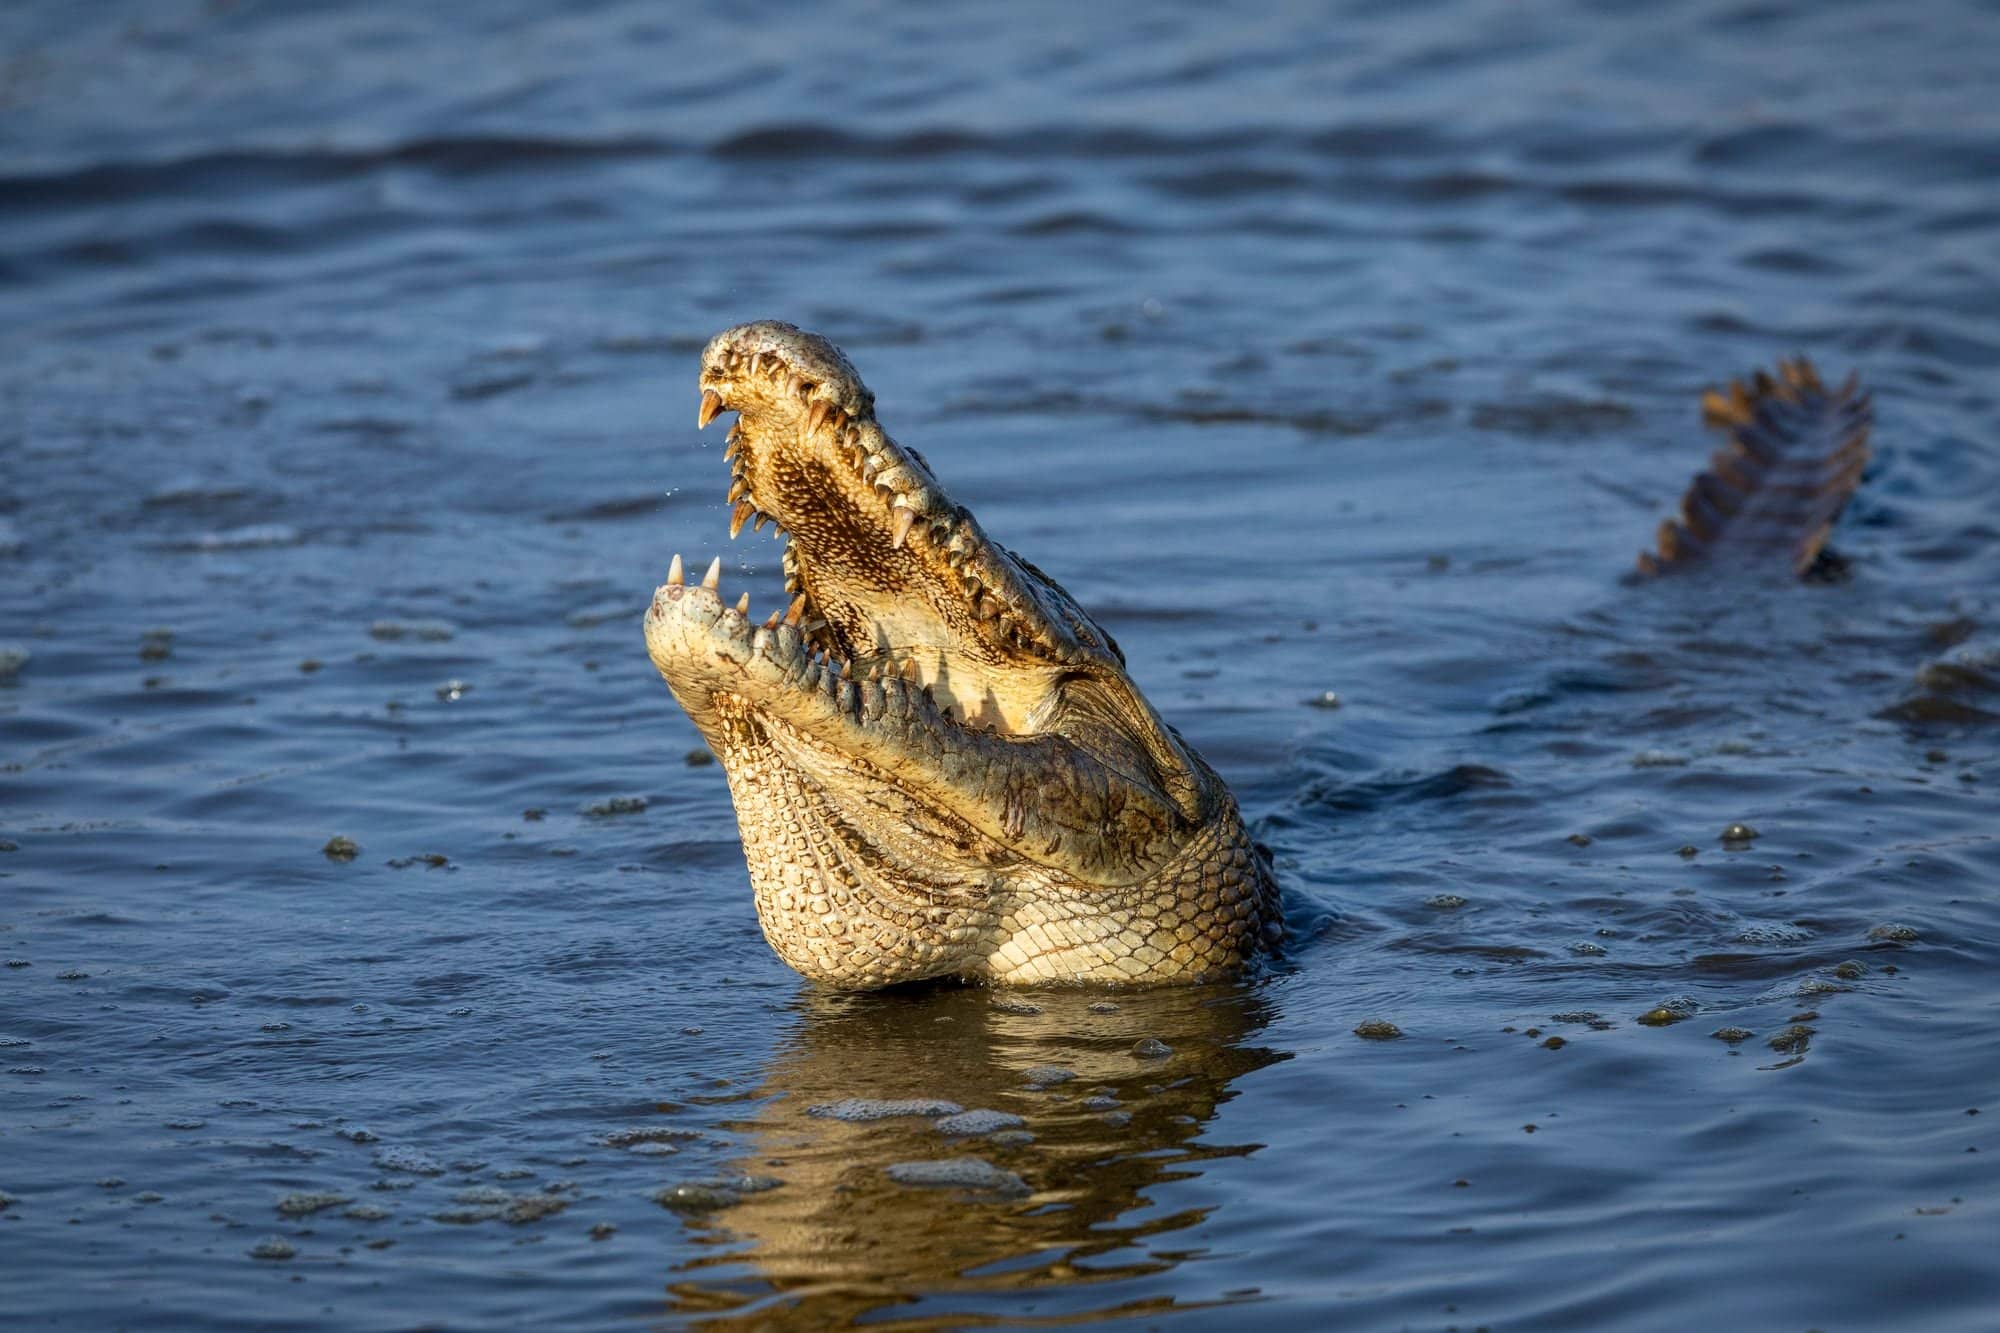 man attacked by alligator while urinating